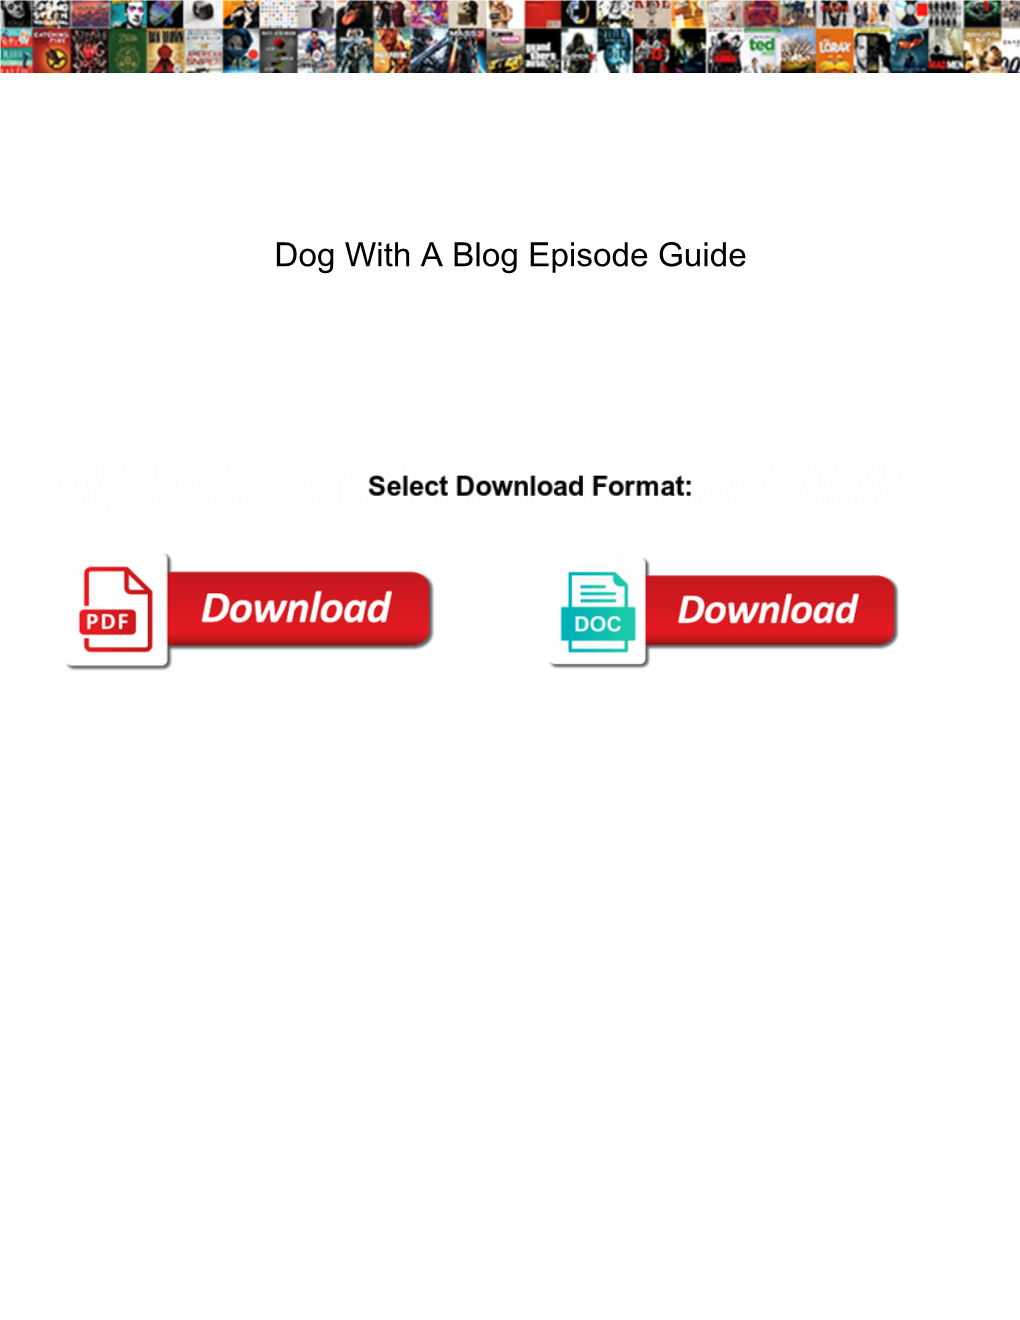 Dog with a Blog Episode Guide